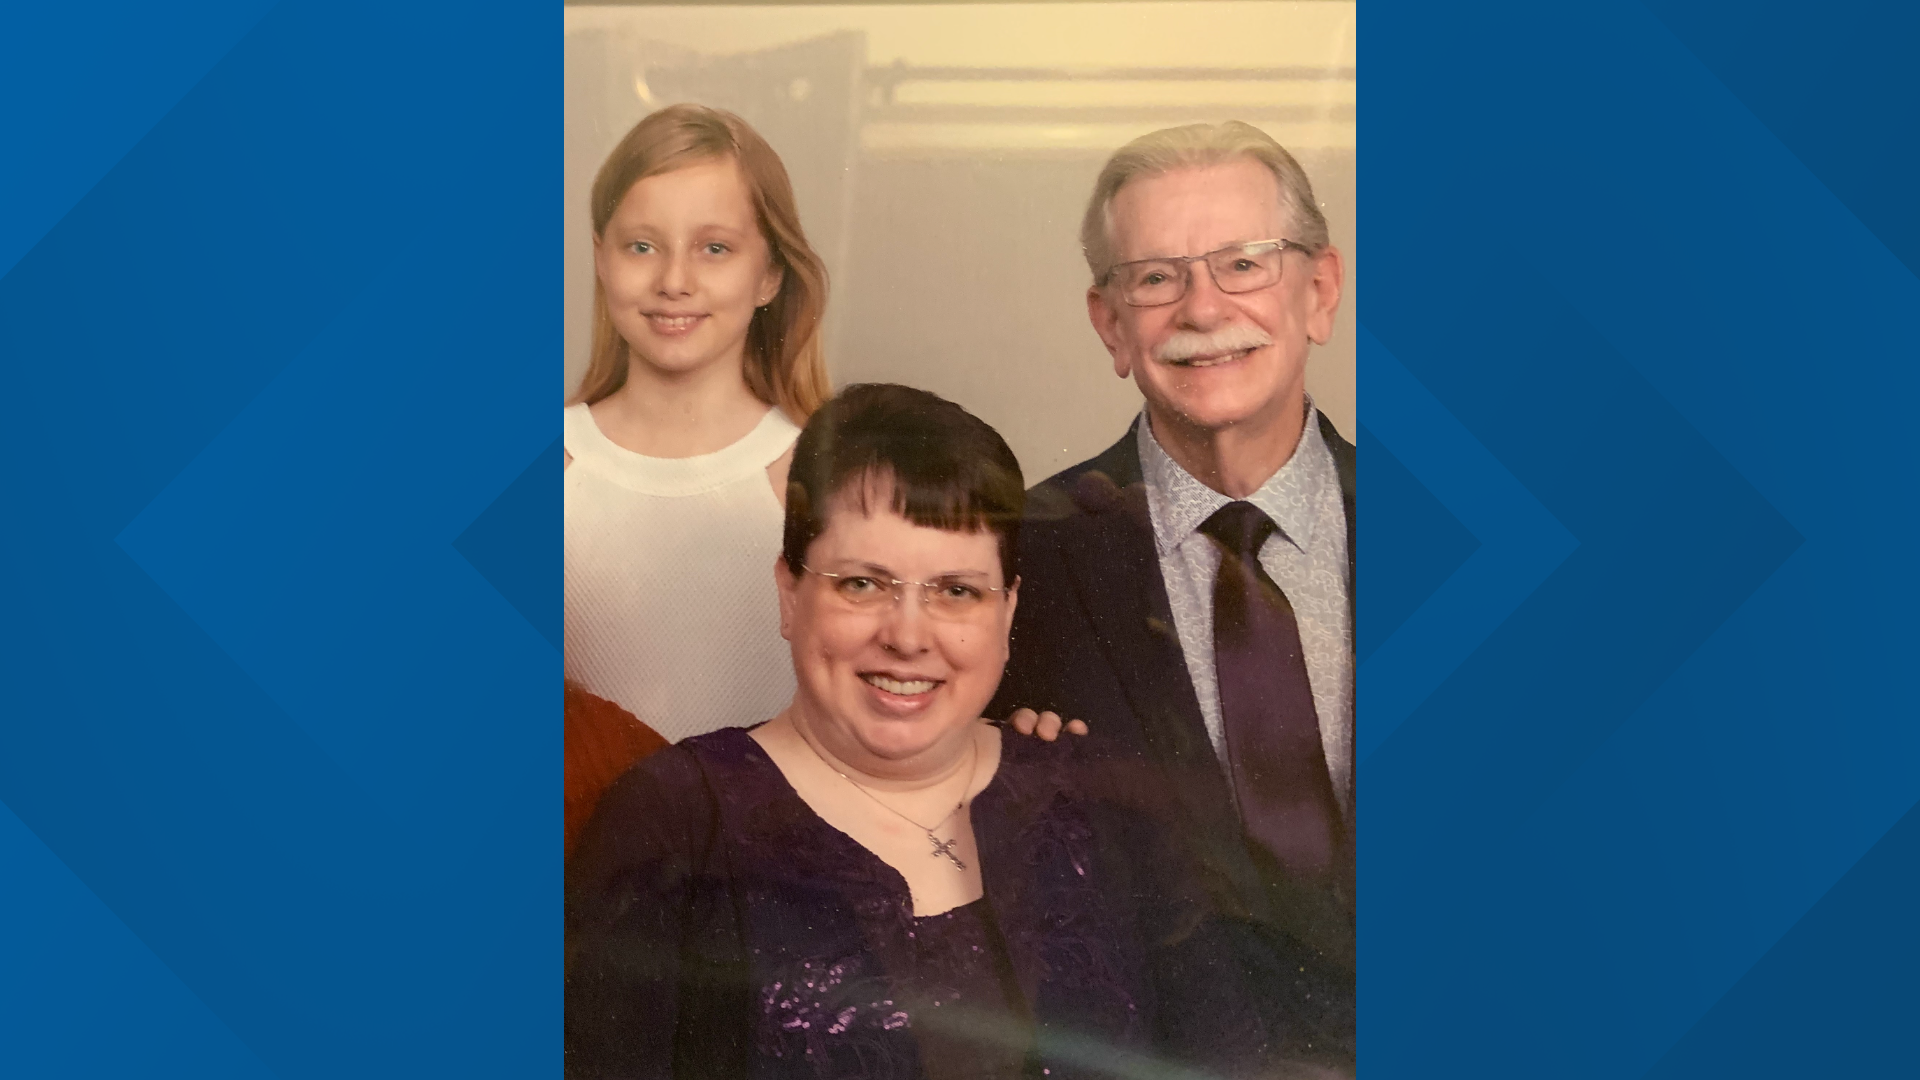 The family was on their way back from a trip to Alaska when the tragic accident occurred.